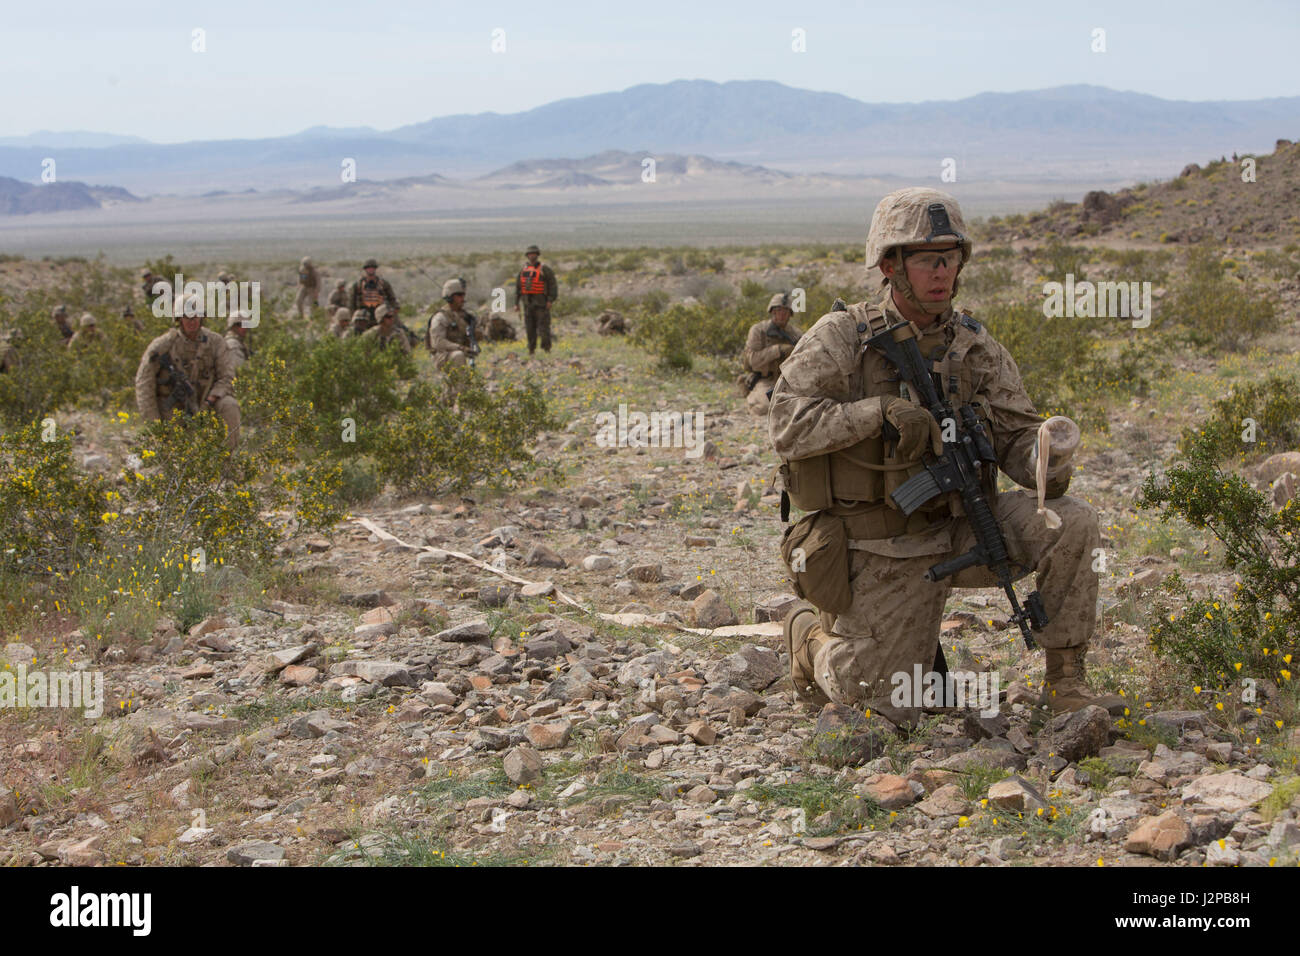 U.S. Marines with Golf Company, 2nd Battalion, 6th Marine Regiment, 2nd Marine Division (2d MARDIV), await the breach of simulated enemy concertina wire during company-level attack live fire training at Range 400 for Talon Exercise (TalonEx) 2-17, Marine Corps Air Ground Combat Center, Twentynine Palms, C.A., April 9, 2017. The purpose of TalonEx was for ground combat units to conduct integrated training in support of the Weapons and Tactics Instructor Course (WTI) 2-17 hosted by Marine Aviation Weapons and Tactics Squadron One (MAWTS-1). (U.S. Marine Corps photo by Lance Cpl. Tojyea G. Matall Stock Photo